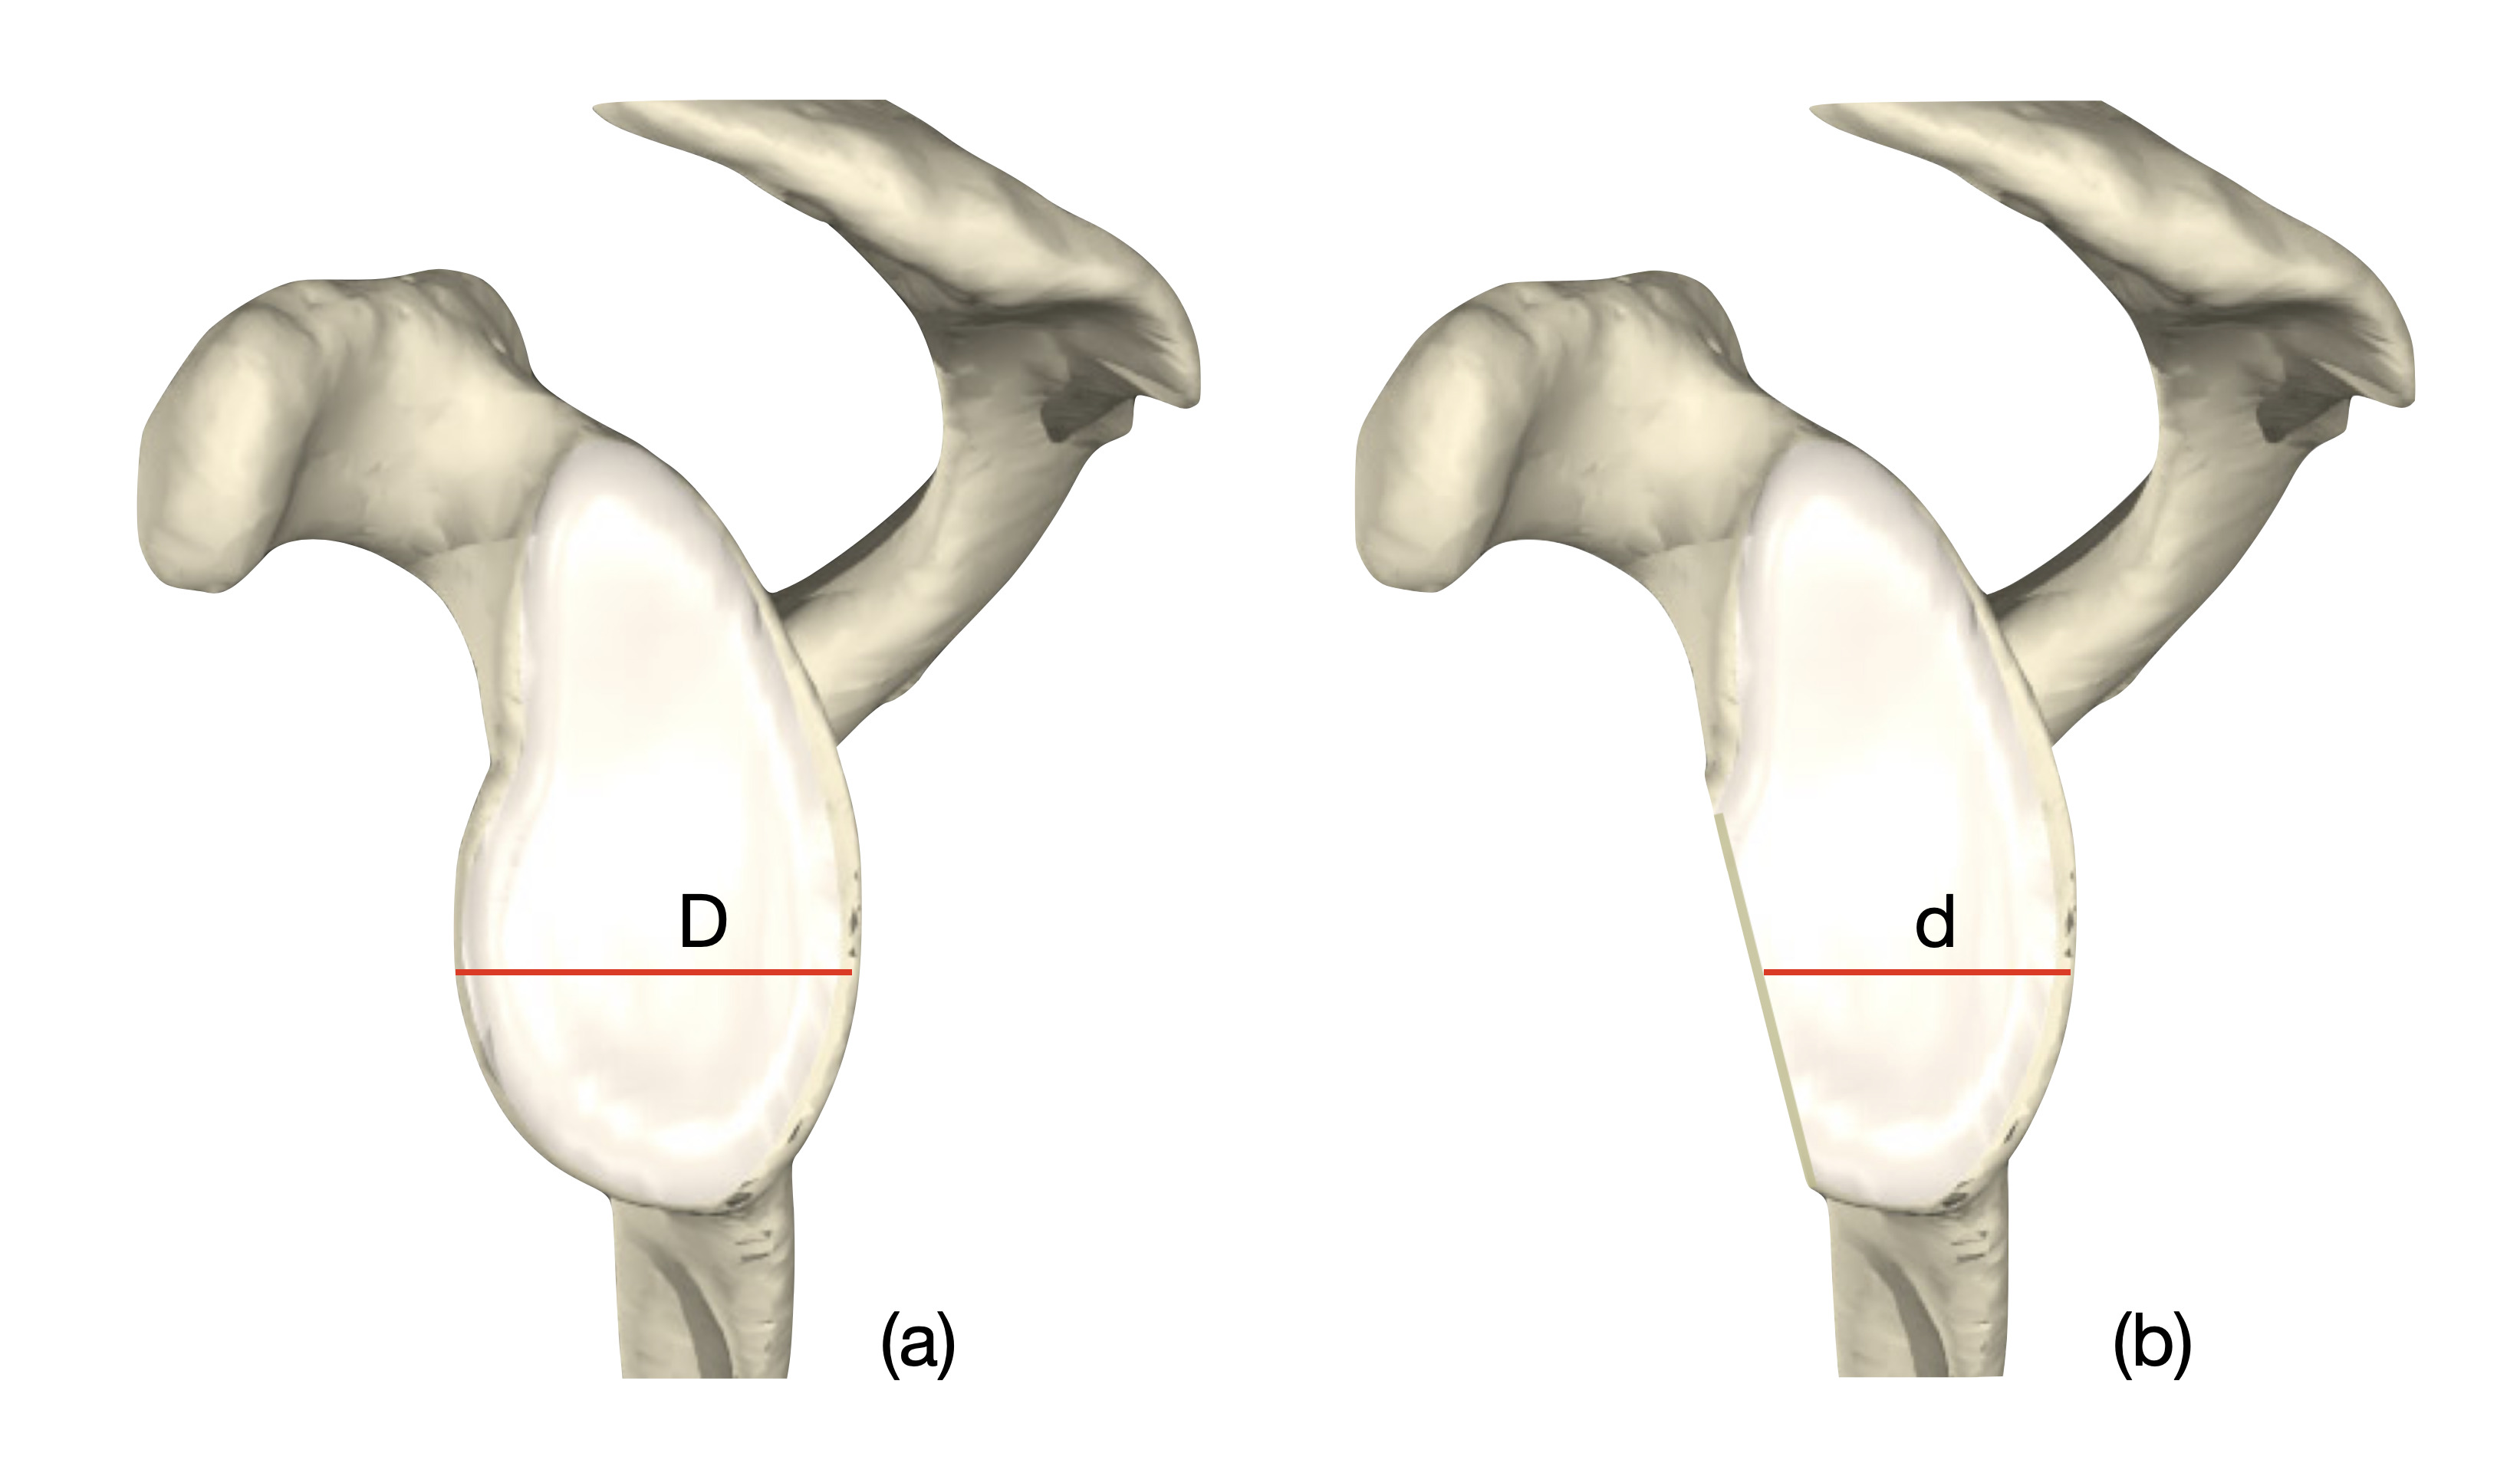 Fig. 2 
            Relative diameter technique. The diameter of the injured glenoid (d) is expressed as a percentage of the diameter of the contralateral glenoid (D).
          